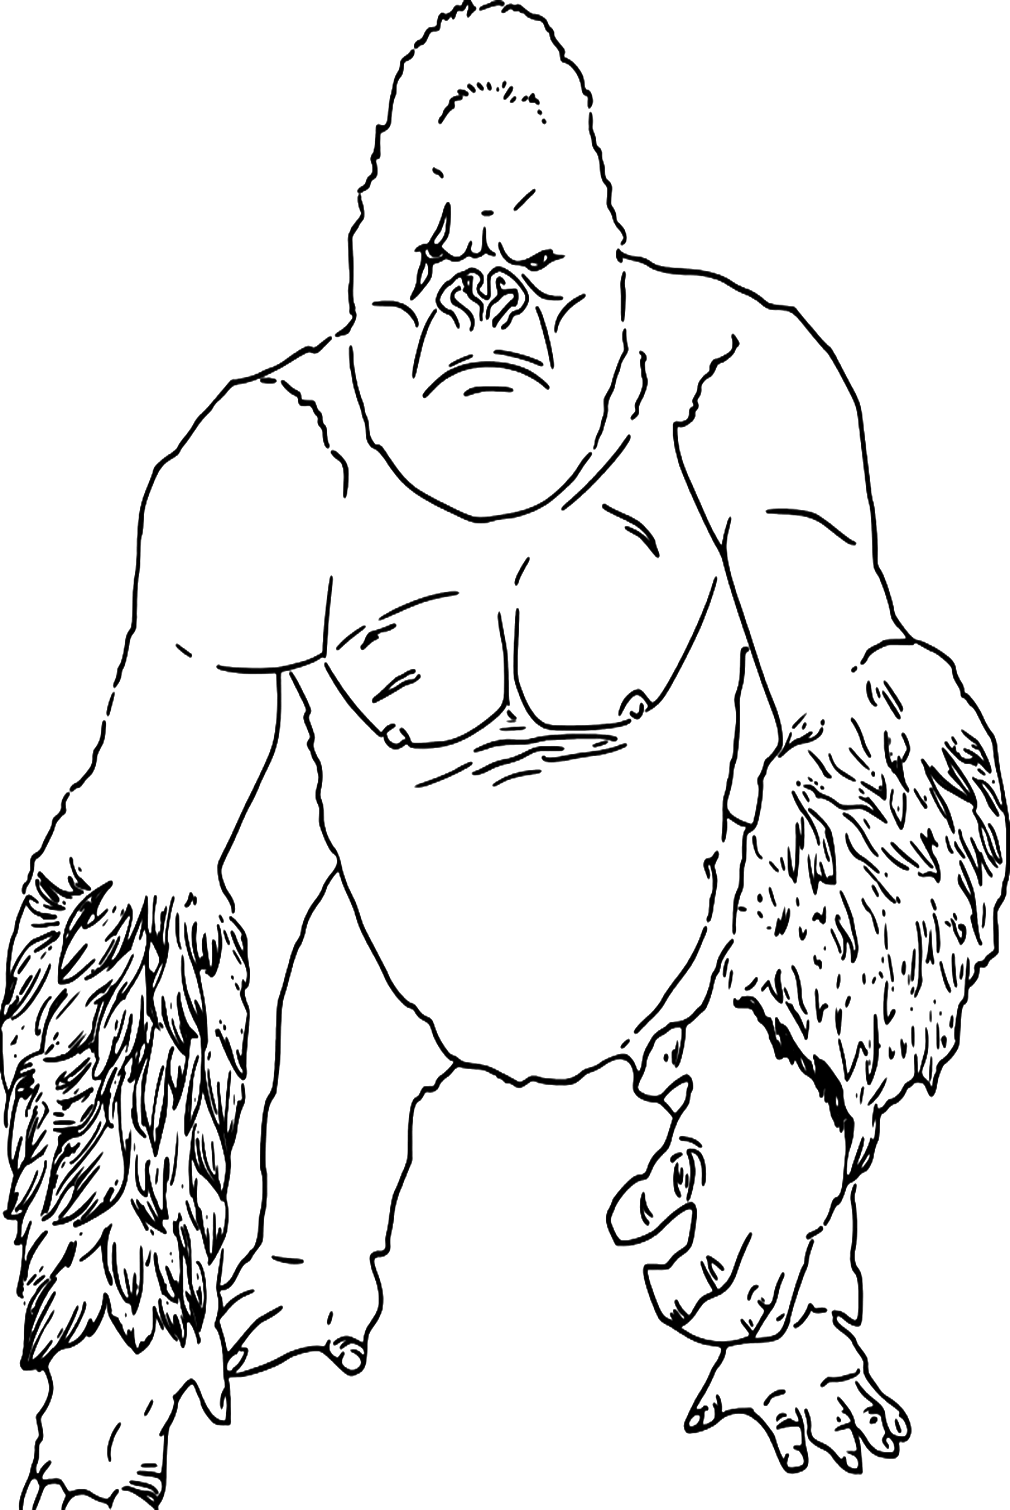 King Kong Great Ape Coloring Page - Free Printable Coloring Pages